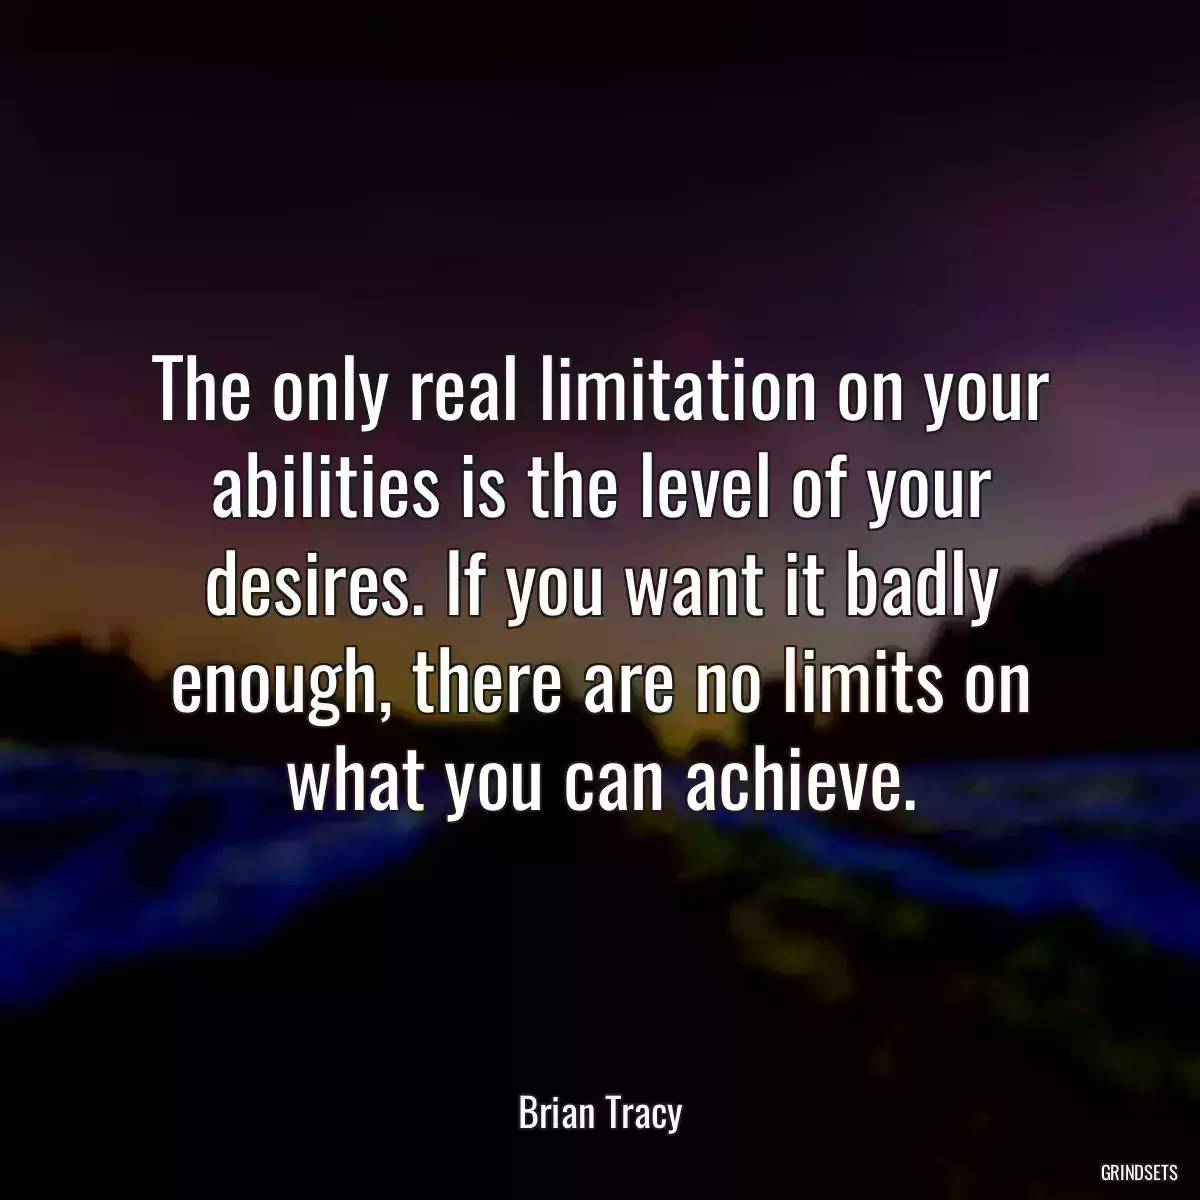 The only real limitation on your abilities is the level of your desires. If you want it badly enough, there are no limits on what you can achieve.